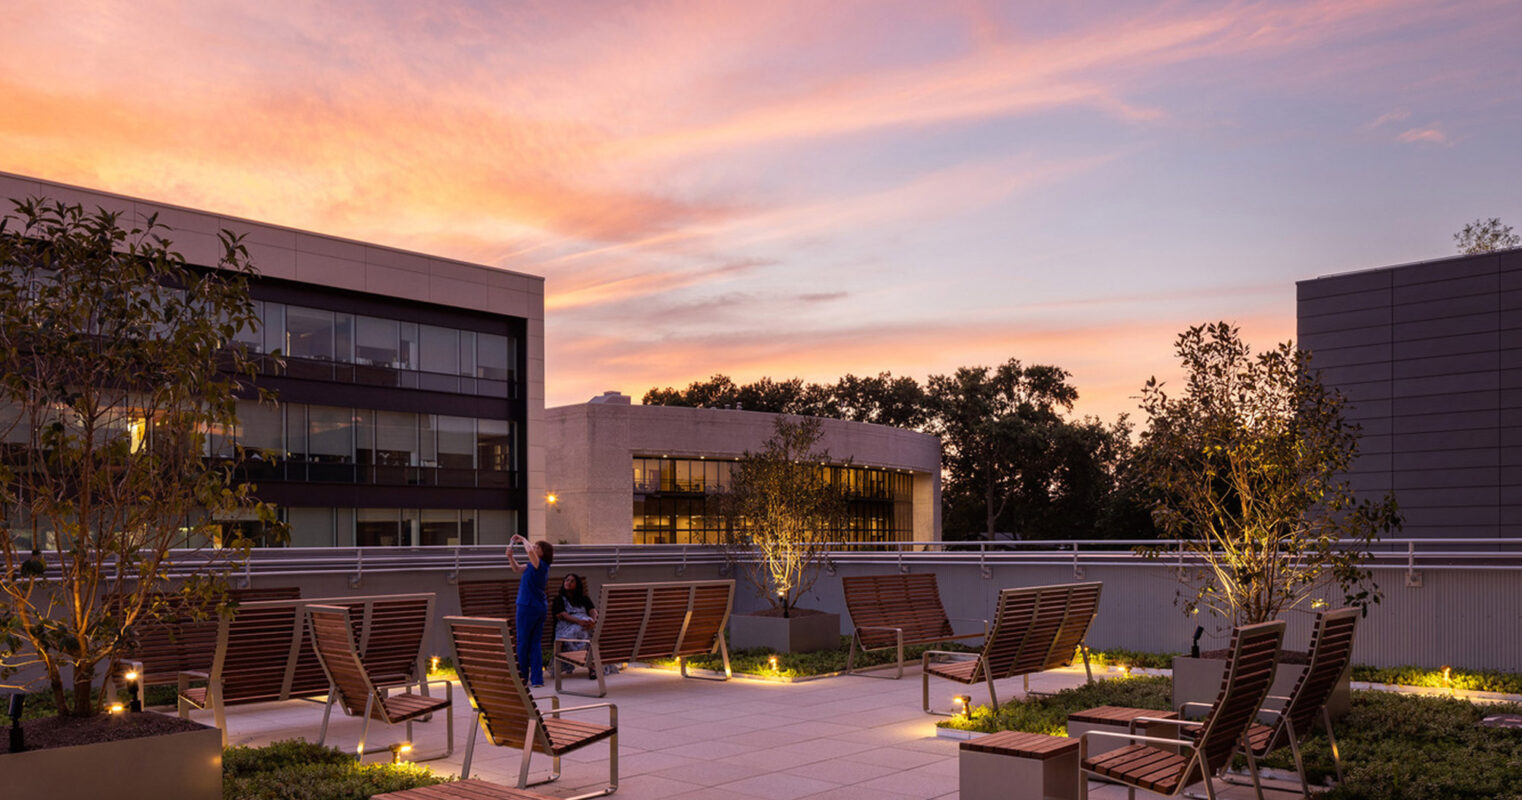 Rooftop terrace at dusk with integrated wooden seating and planters, under-floor lighting, against a backdrop of modern architecture and a vibrant sunset sky.